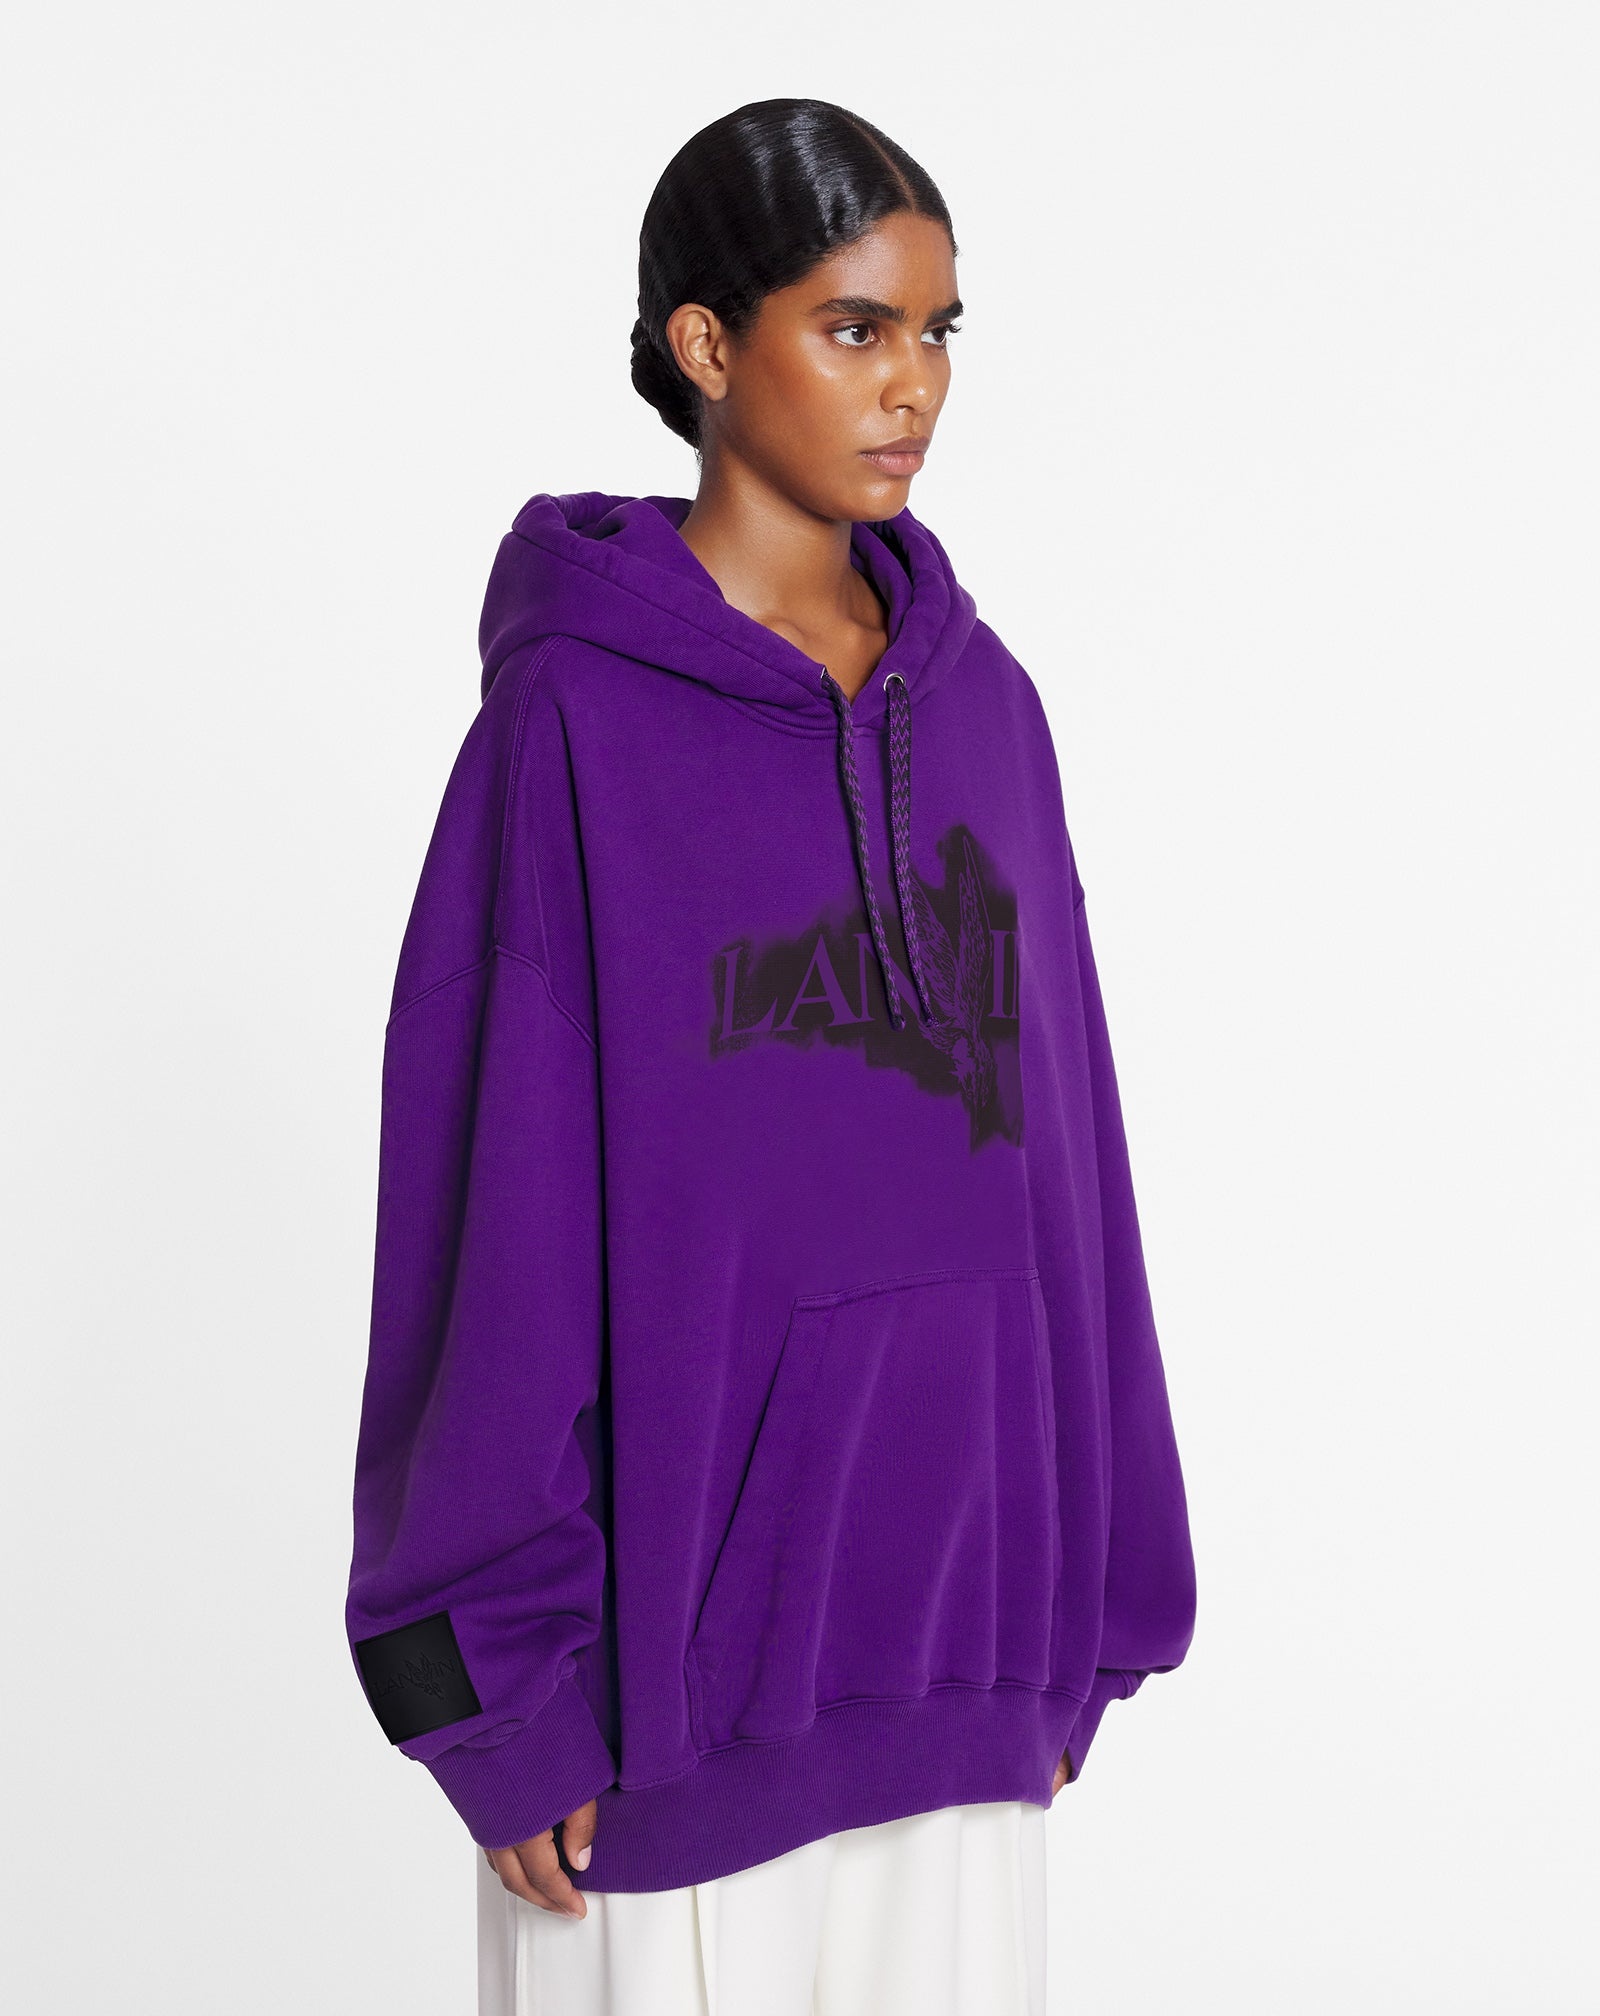 LANVIN X FUTURE UNISEX BAGGY HOODIE WITH EAGLE PRINT - 3